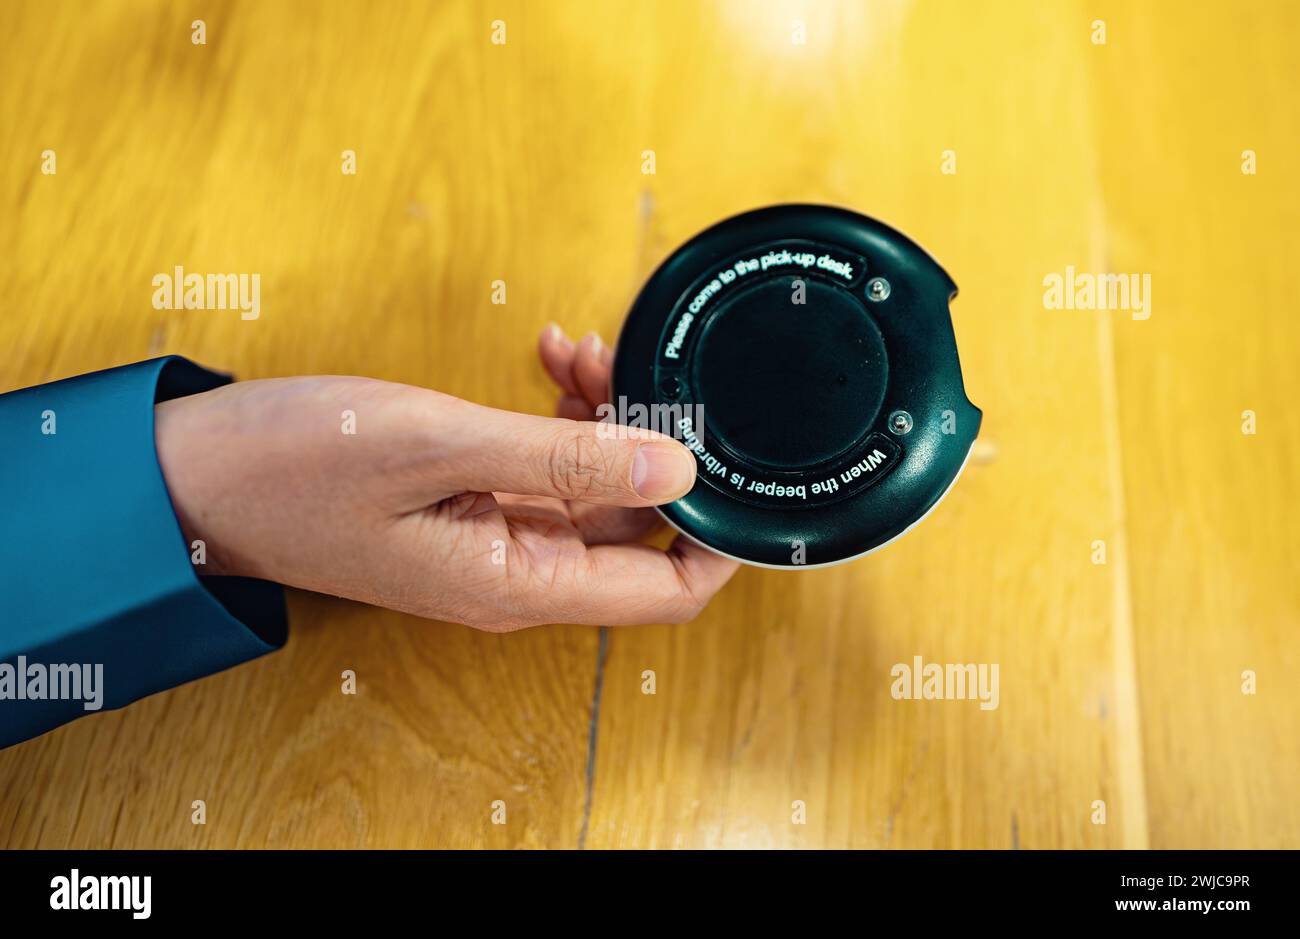 Woman holds a restaurant pager. Queue calling system. Stock Photo